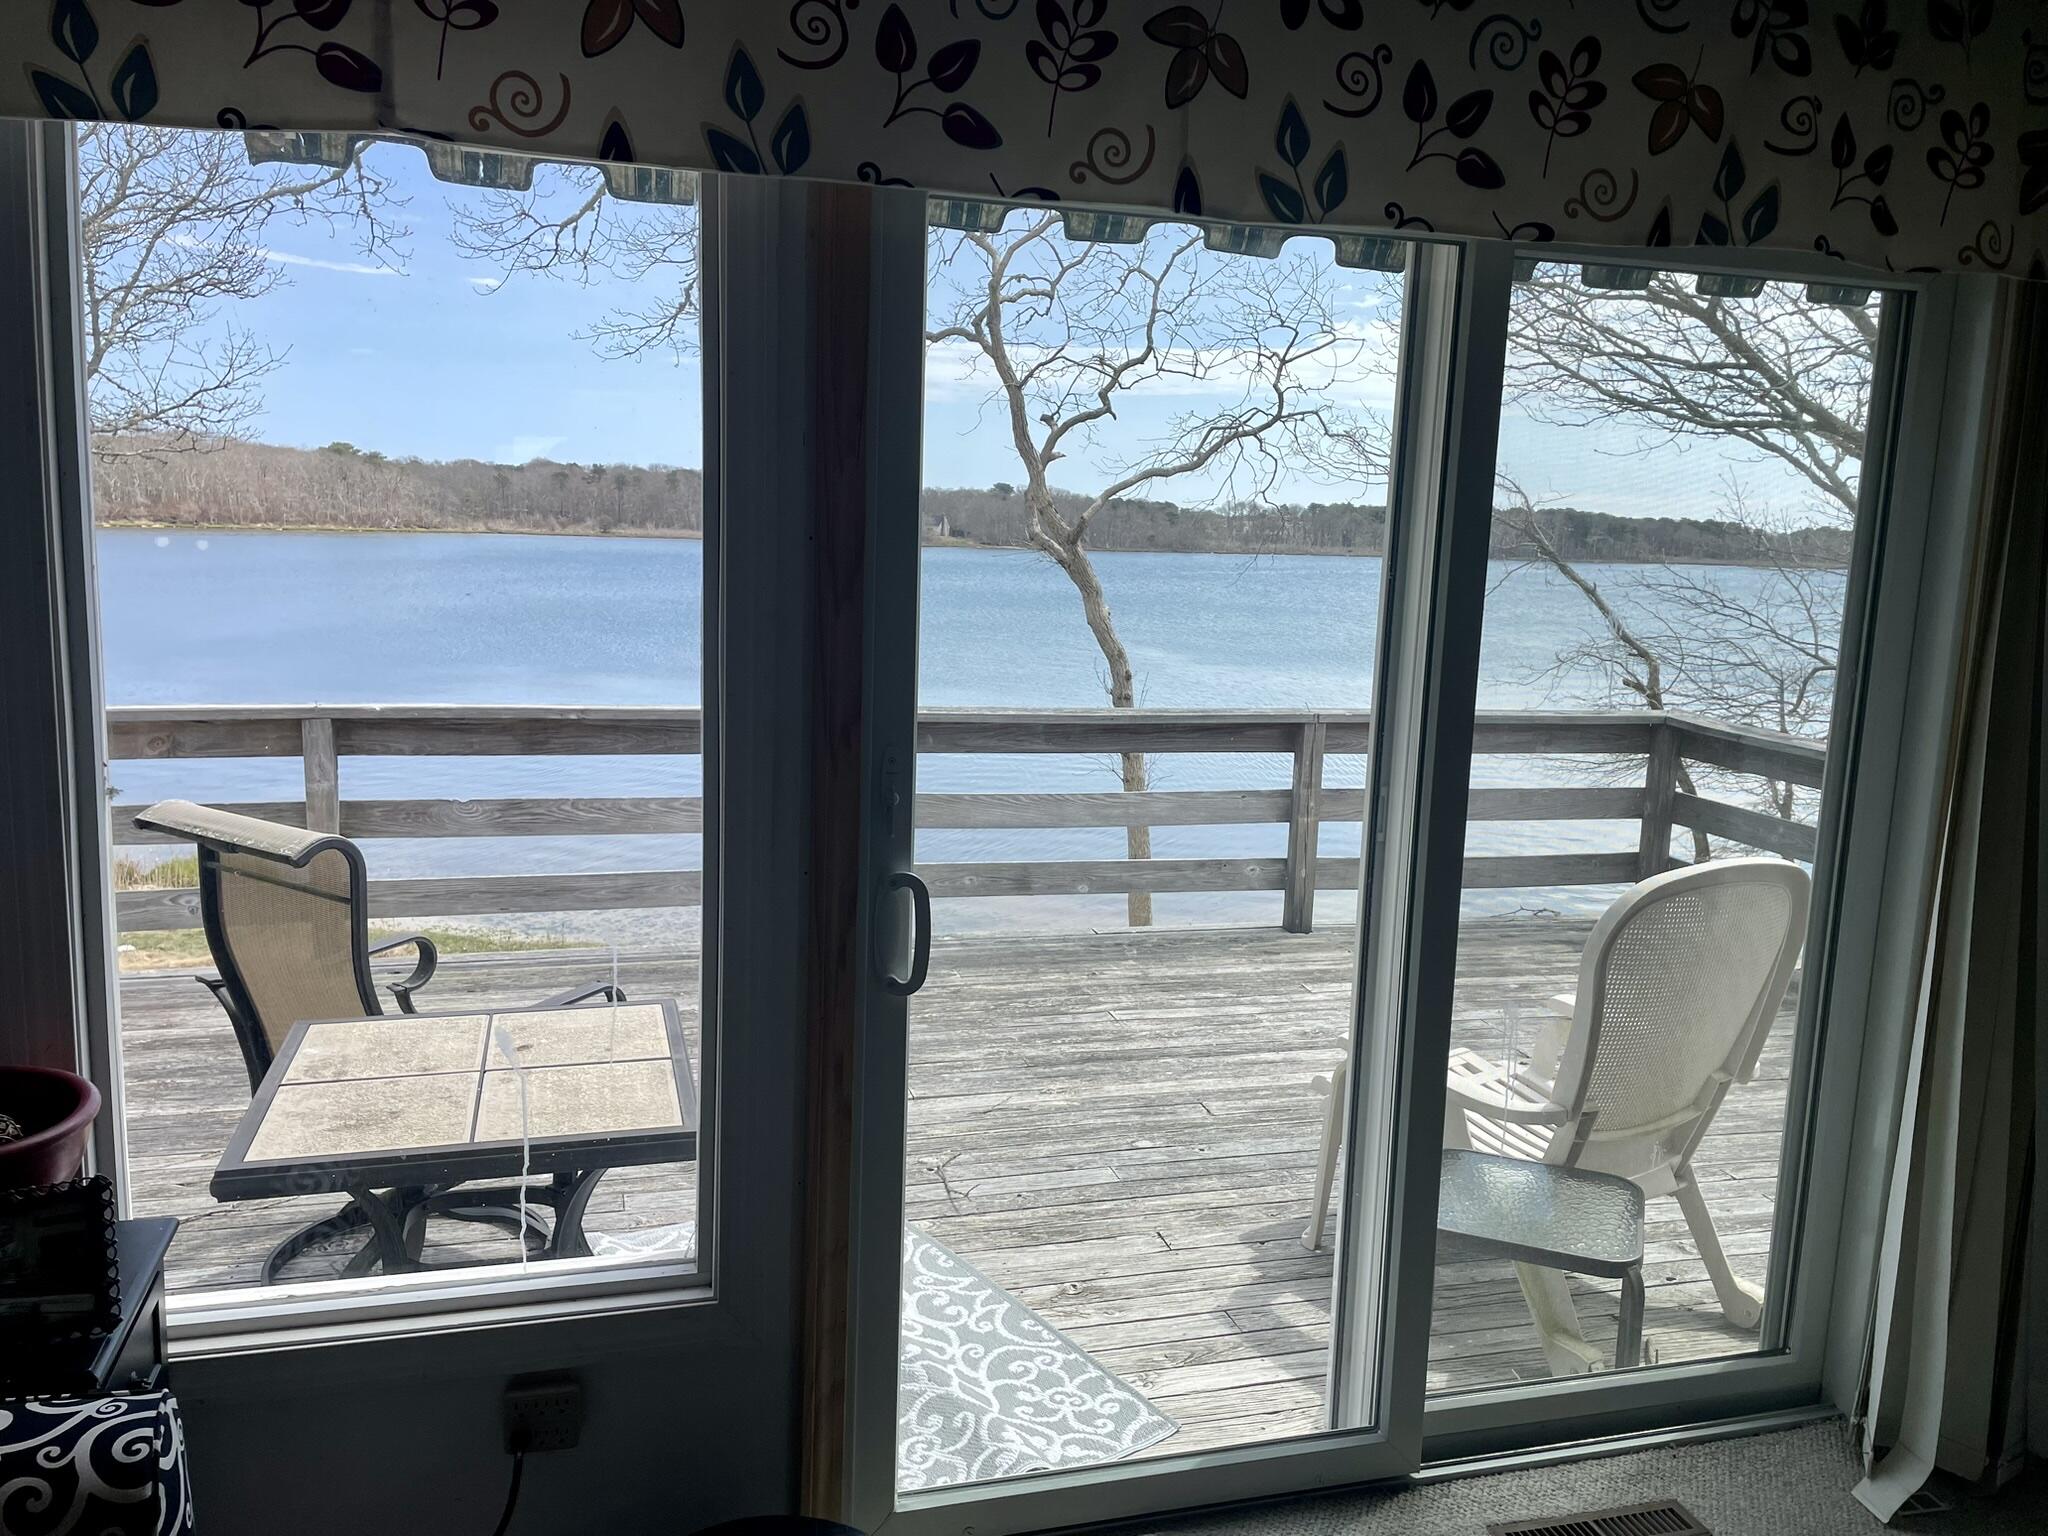 7 Loon Lane, West Yarmouth, Massachusetts 02673, 3 Bedrooms Bedrooms, 5 Rooms Rooms,1 BathroomBathrooms,Residential,For Sale,7 Loon Lane,22401783